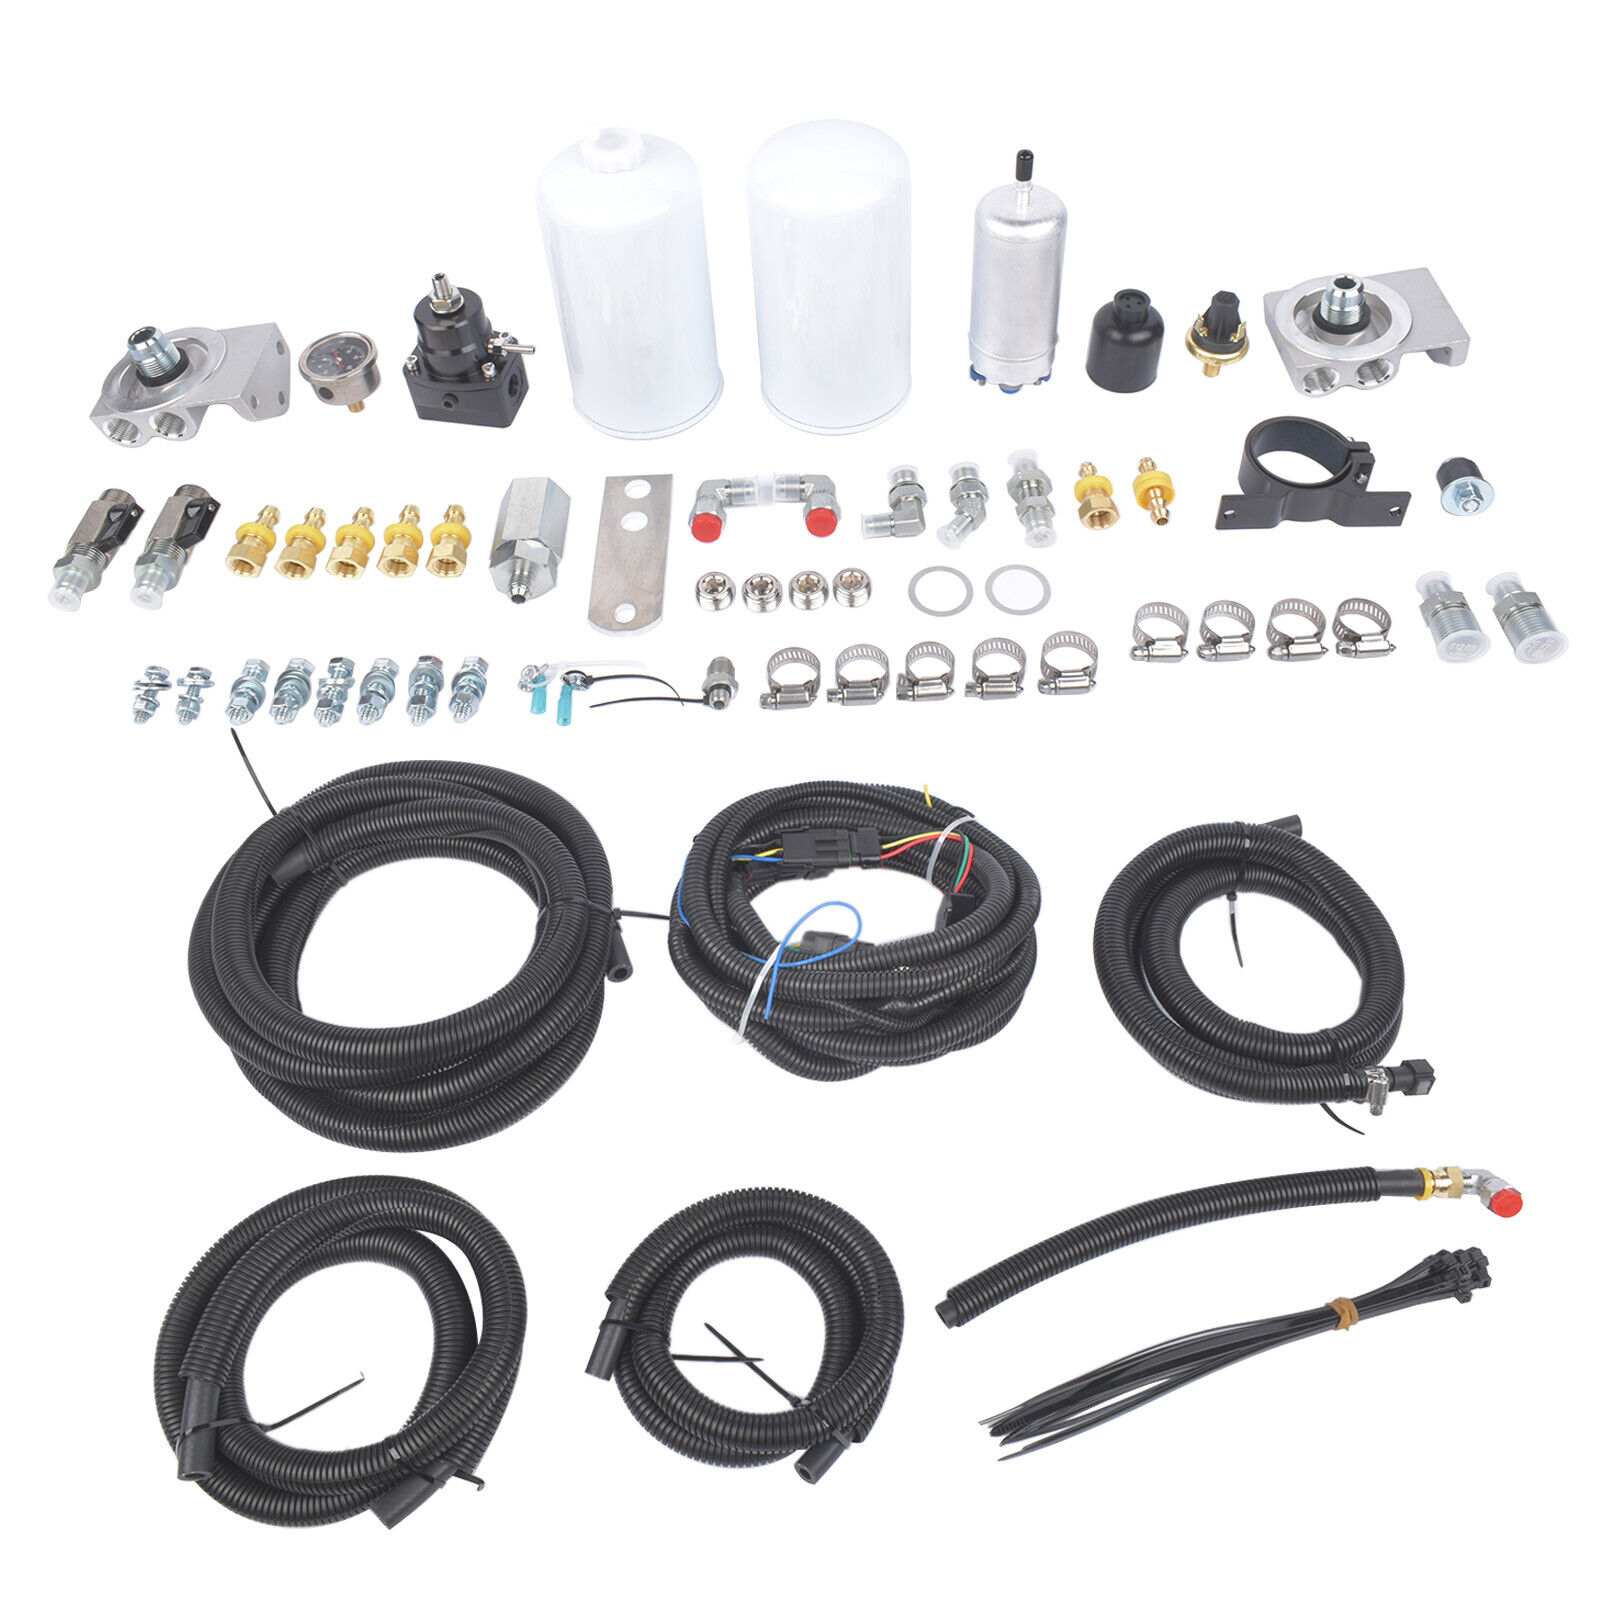 For 1994-97 OBS Ford 7.3L Powerstroke Complete Electric Fuel Pump Conversion Kit